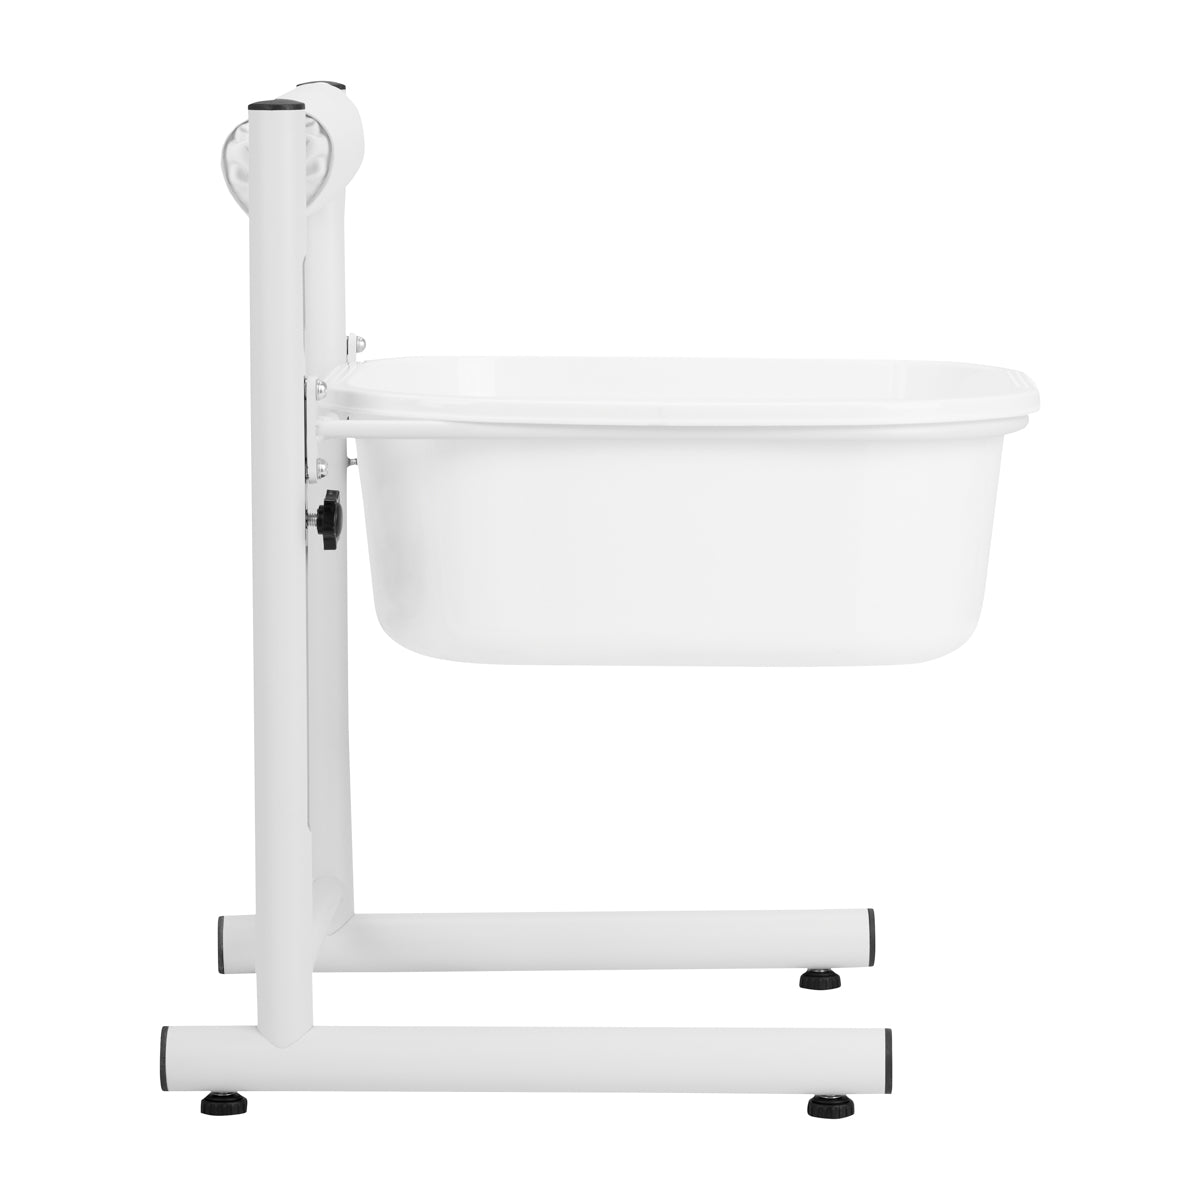 ACTIVESHOP Height-adjustable pedicure tray, white